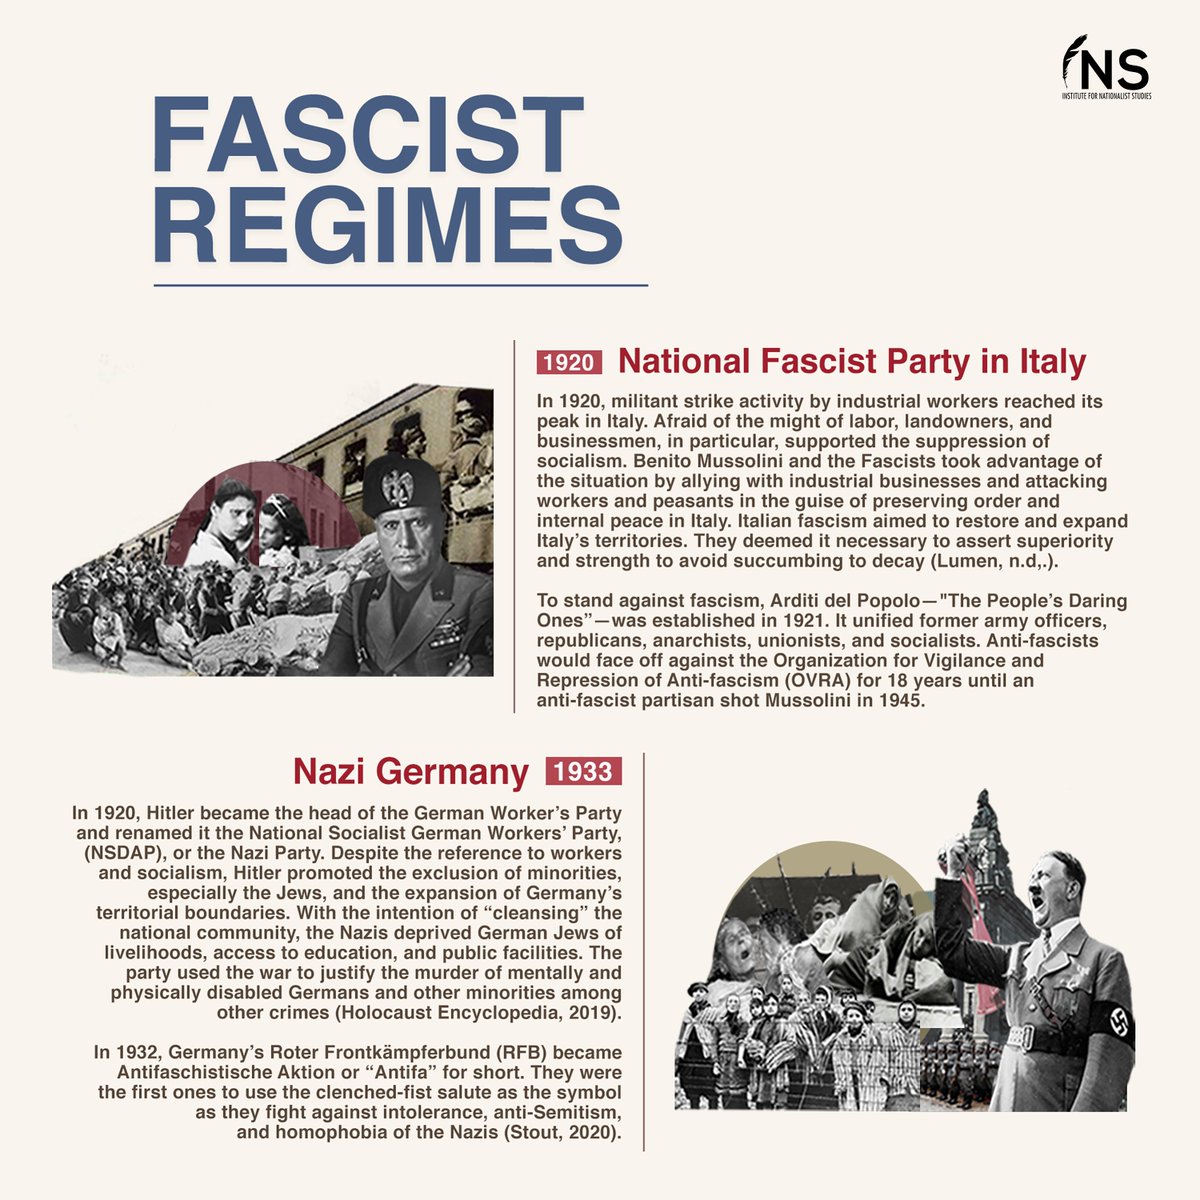 Here are some of the notable fascist regimes throughout world history.Recommended readings:Sison, J.M. (1986). The Social Basis of a Fascist State. Bennagen, ed., ibid, 25-29.Sison, J.M (2000). Imperialism, Fascination, and Fascism. P. 246-273(2/2)